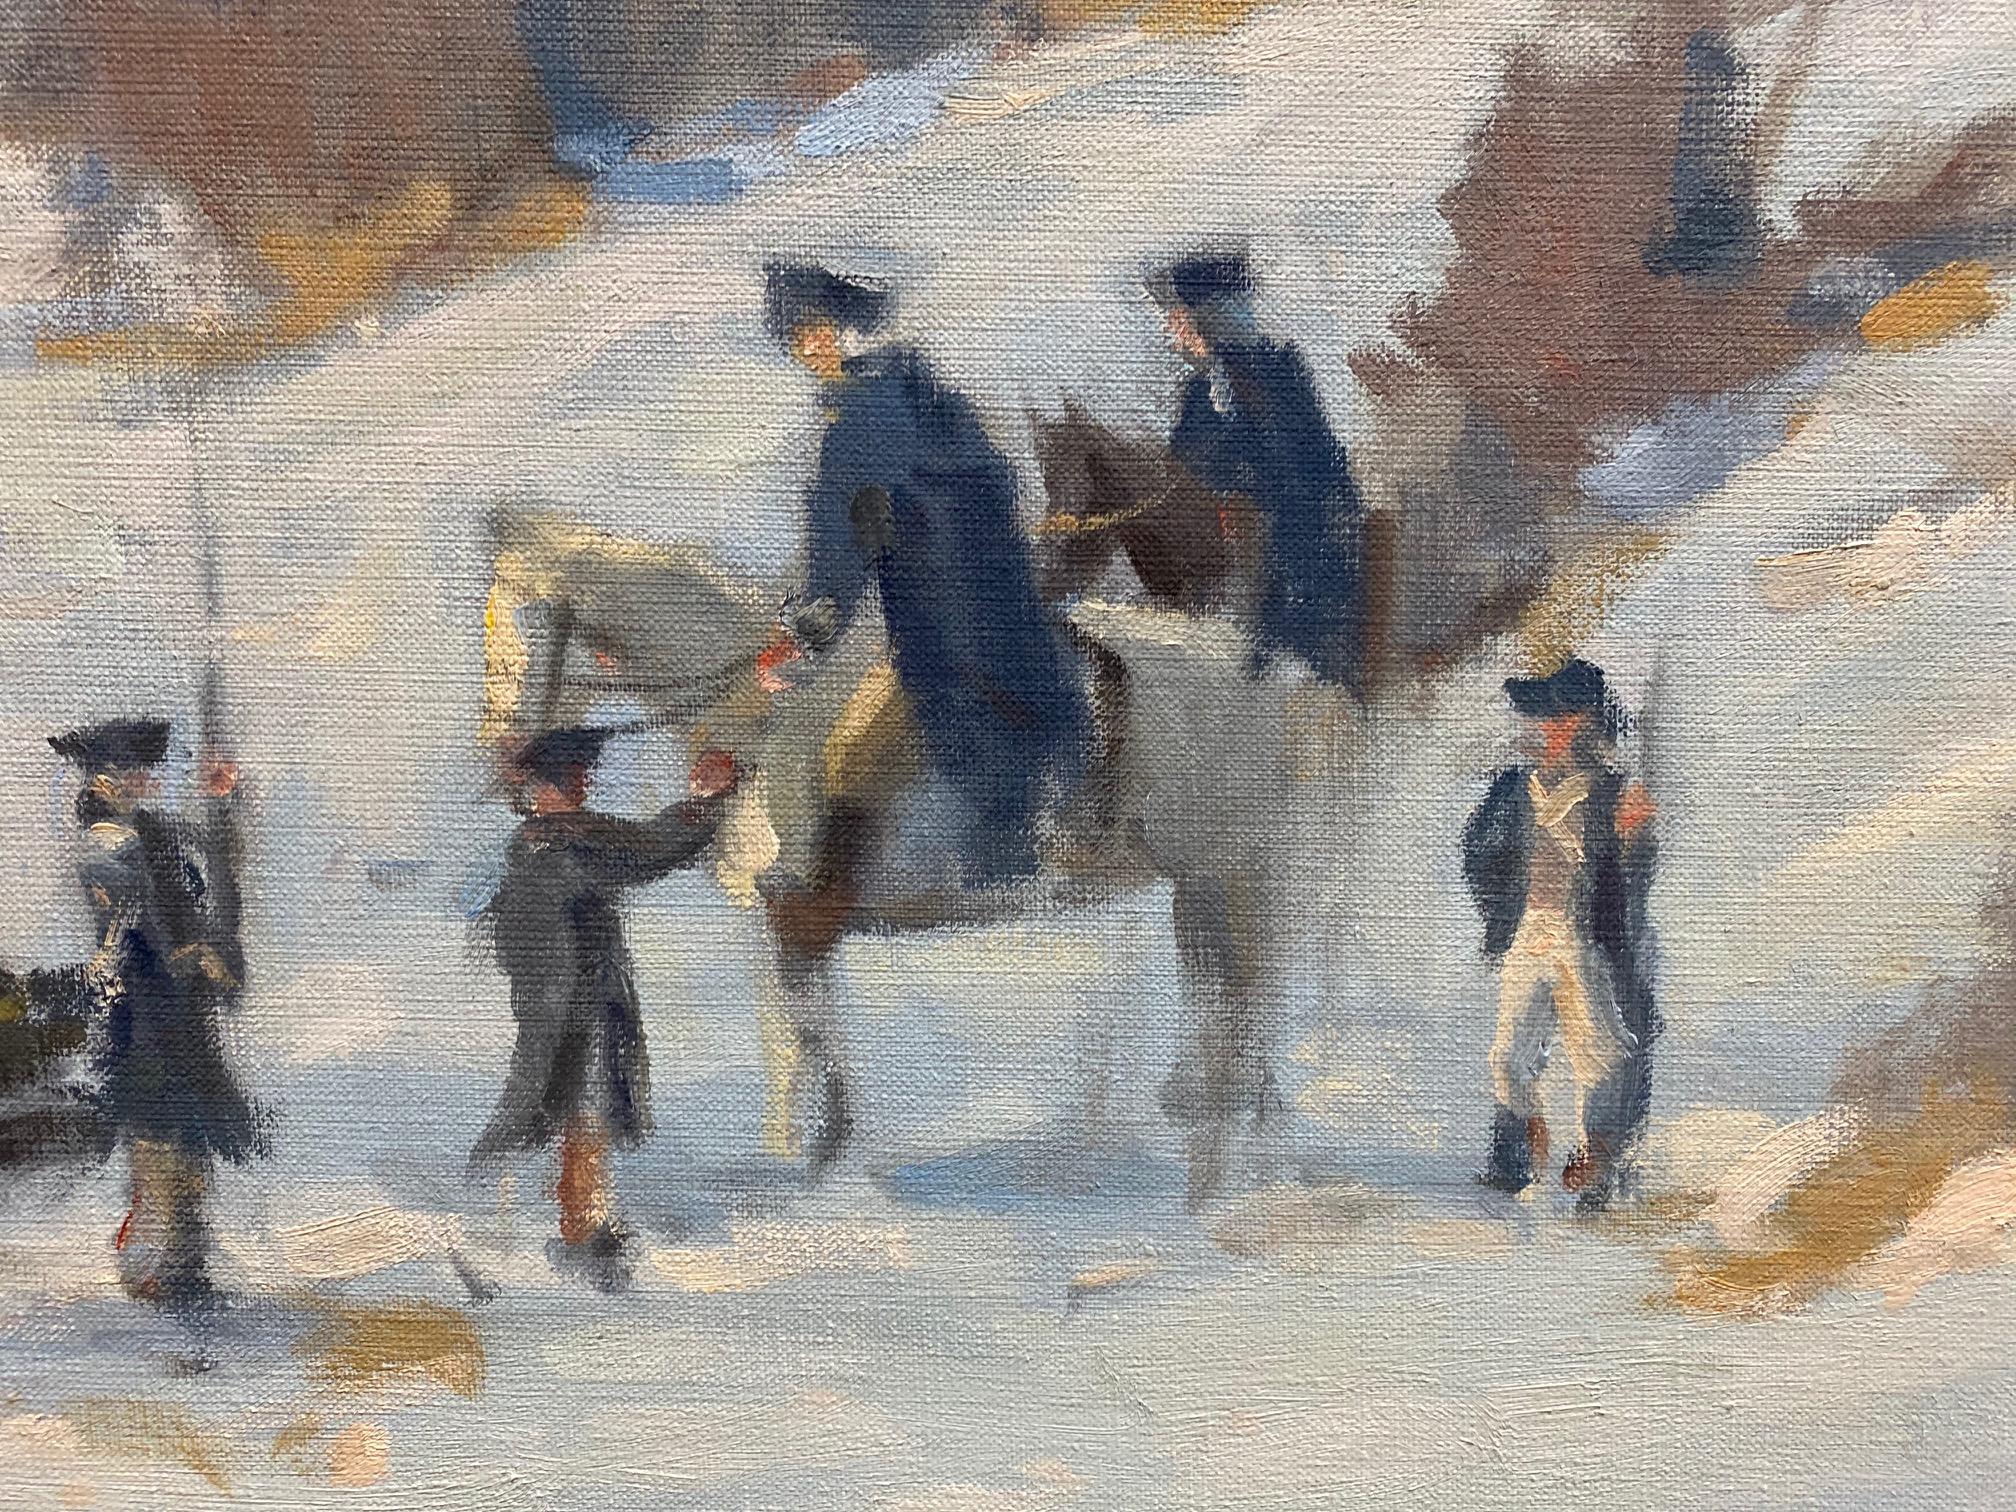 Towards Morristown is an historic depiction of the torturous struggle for American independence which our nation's forefathers faced.  The frigid elements, often threadbare clothes, hilly terrain, often scarce supplies challenge the soldiers as they